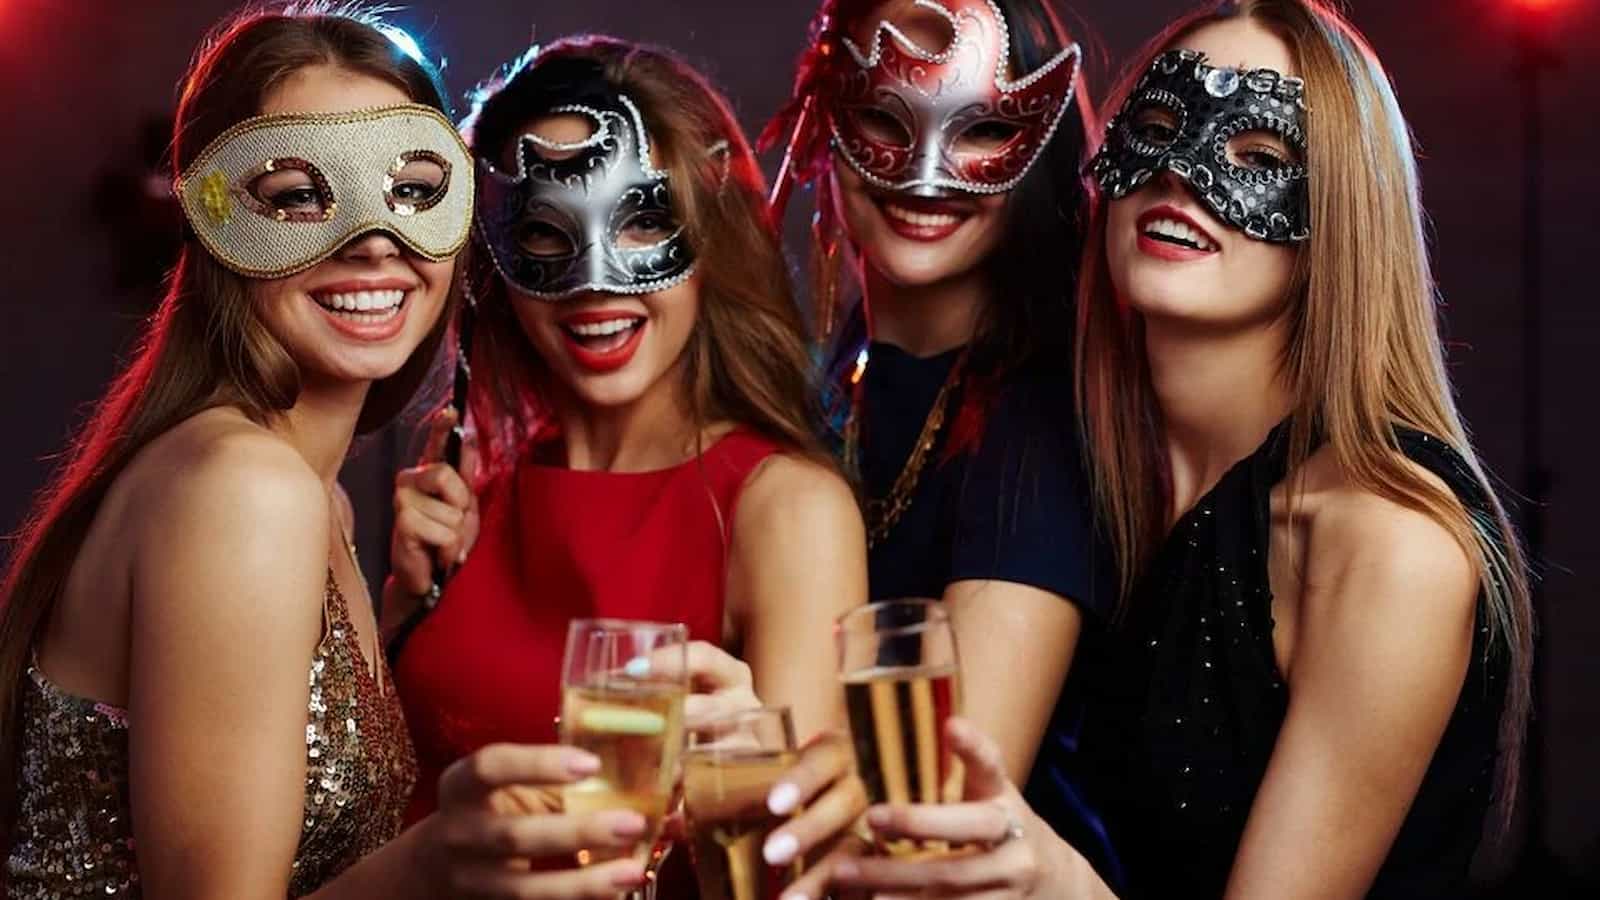 From Acme Fire Cult to El Pastor, here's your guide to the best New Year's Eve parties in London